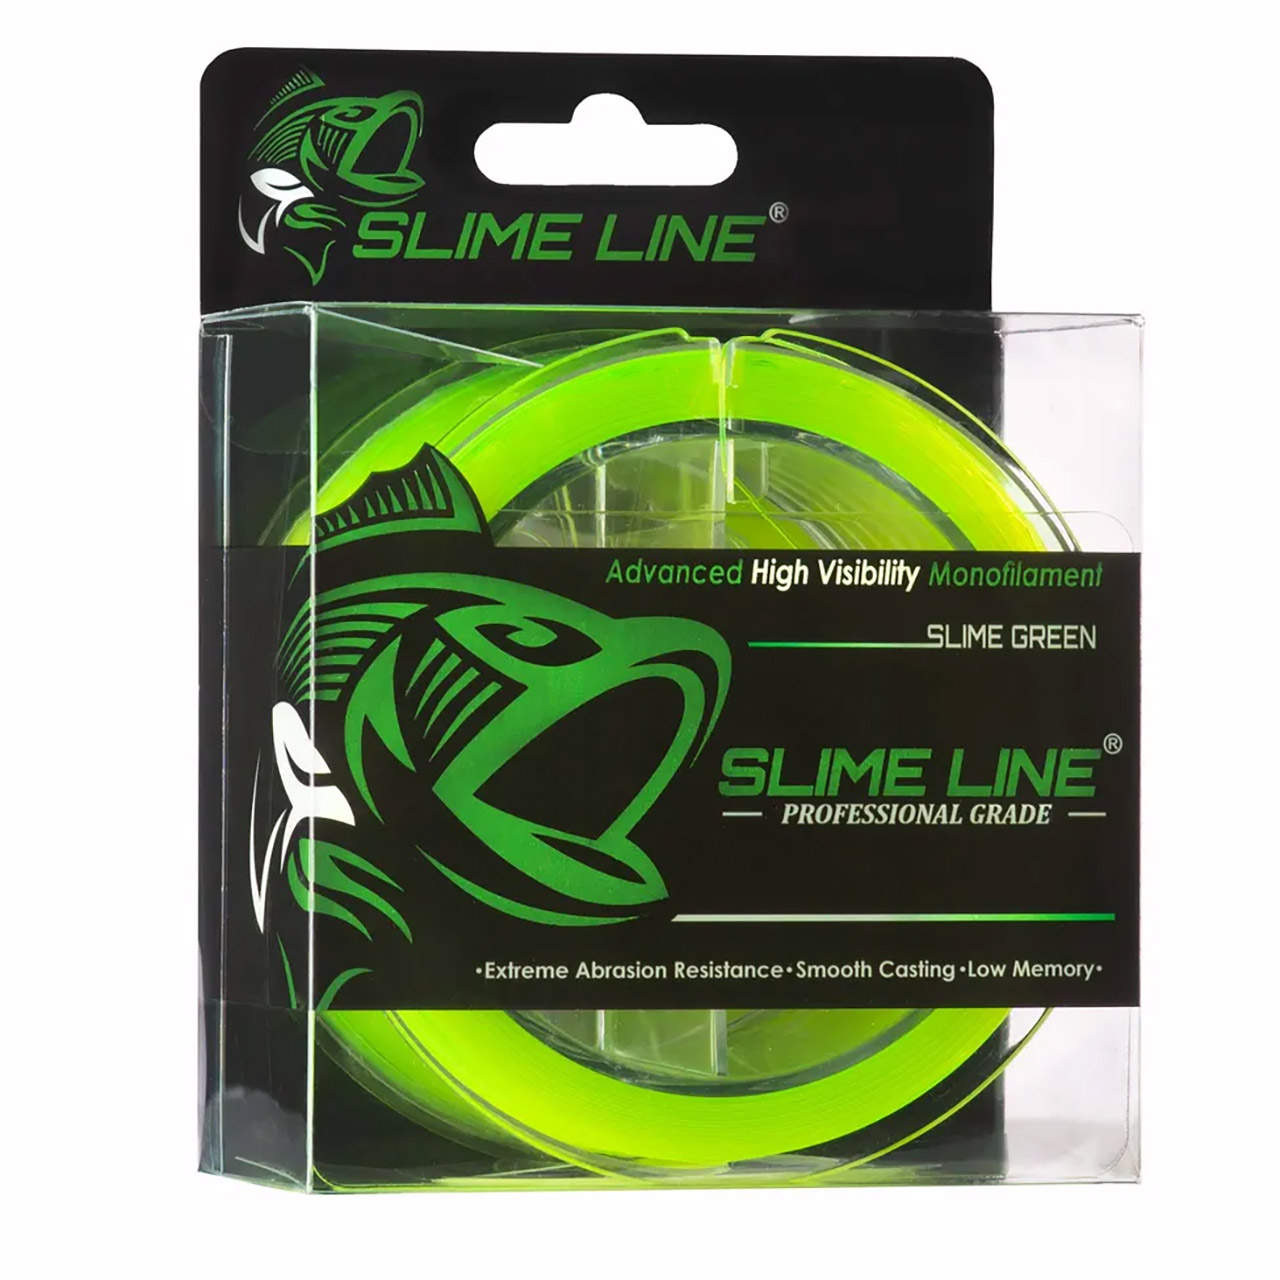 Is Slime Line Fishing Line really as bright as it looks online